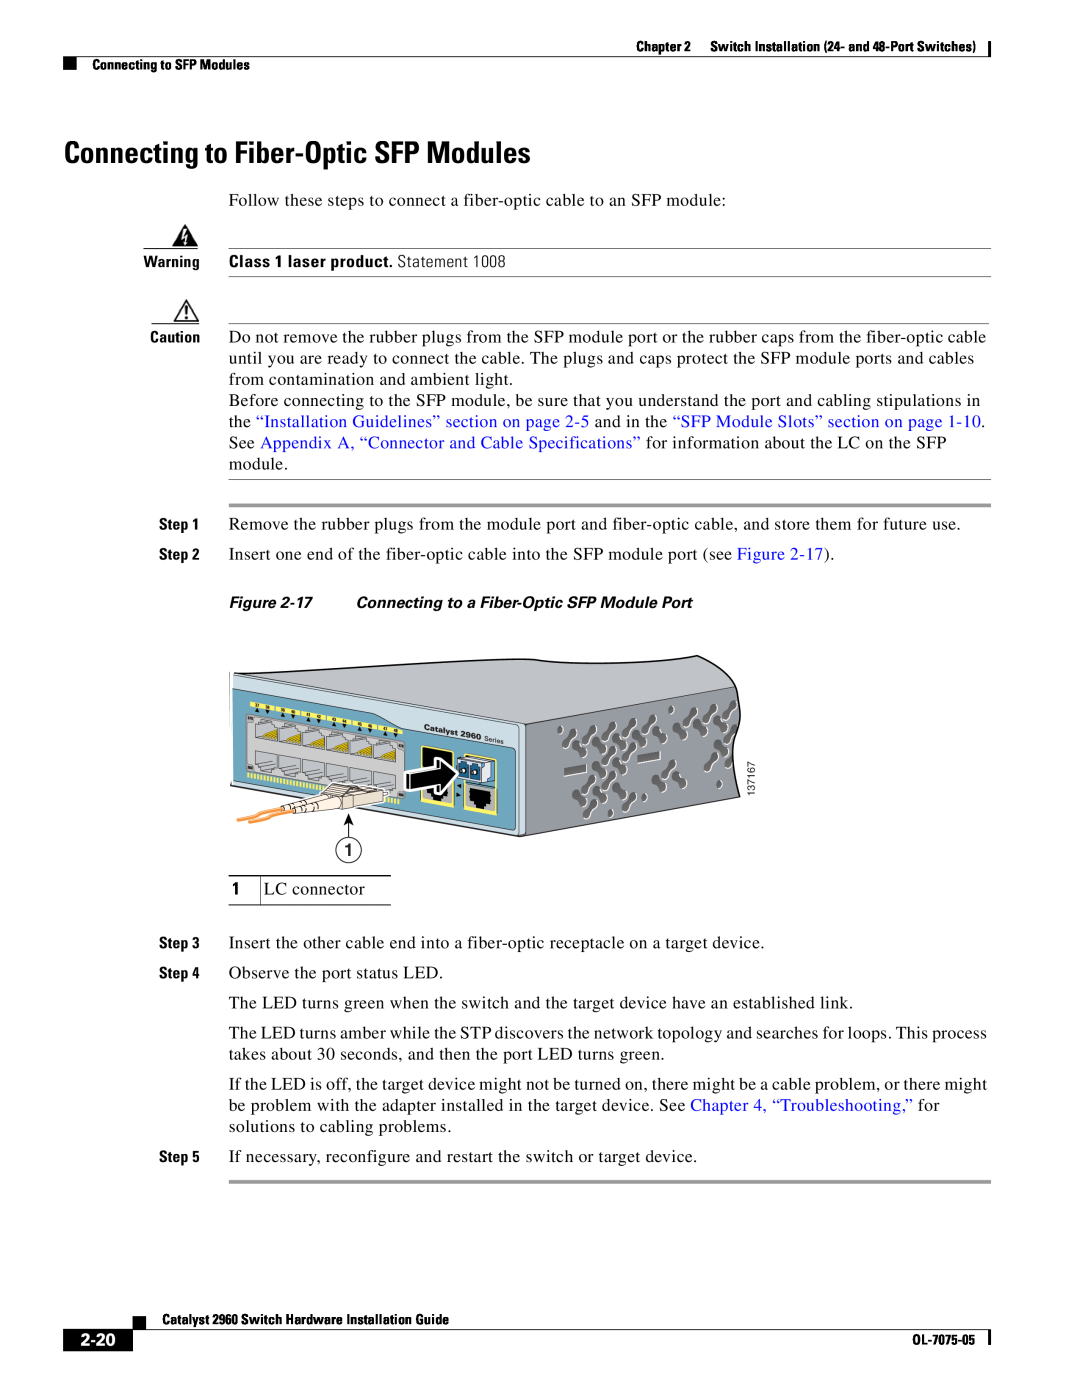 Cisco Systems 2960 specifications Connecting to Fiber-Optic SFP Modules, 2-20, Warning Class 1 laser product. Statement 